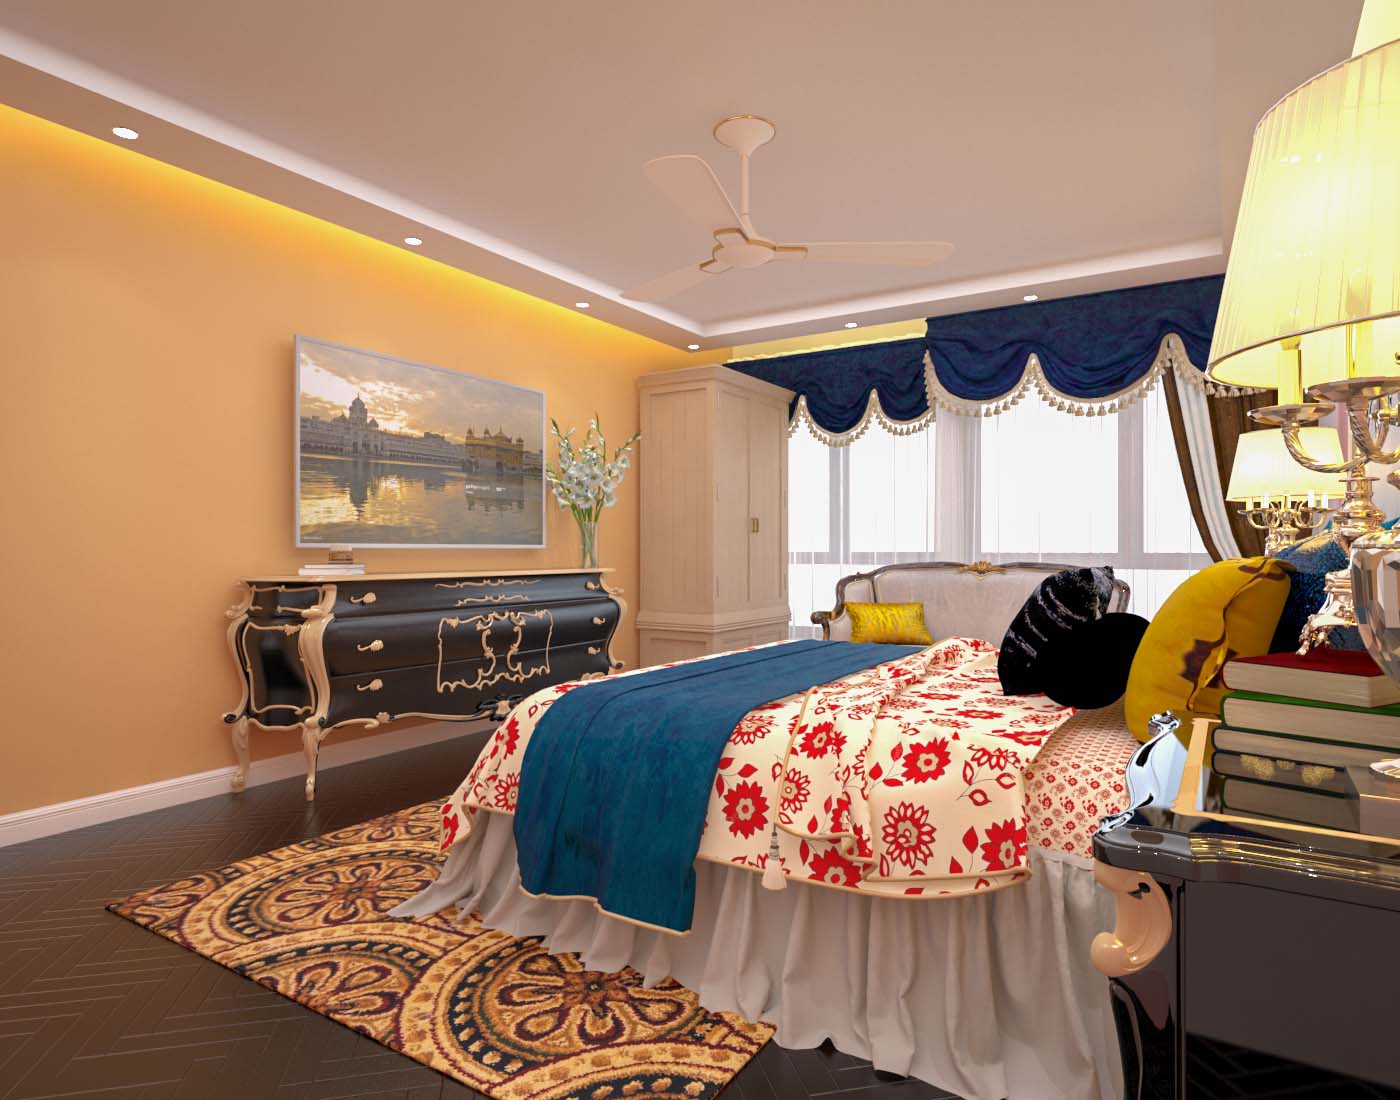 Give a Feel of Punjab to Your Bedroom